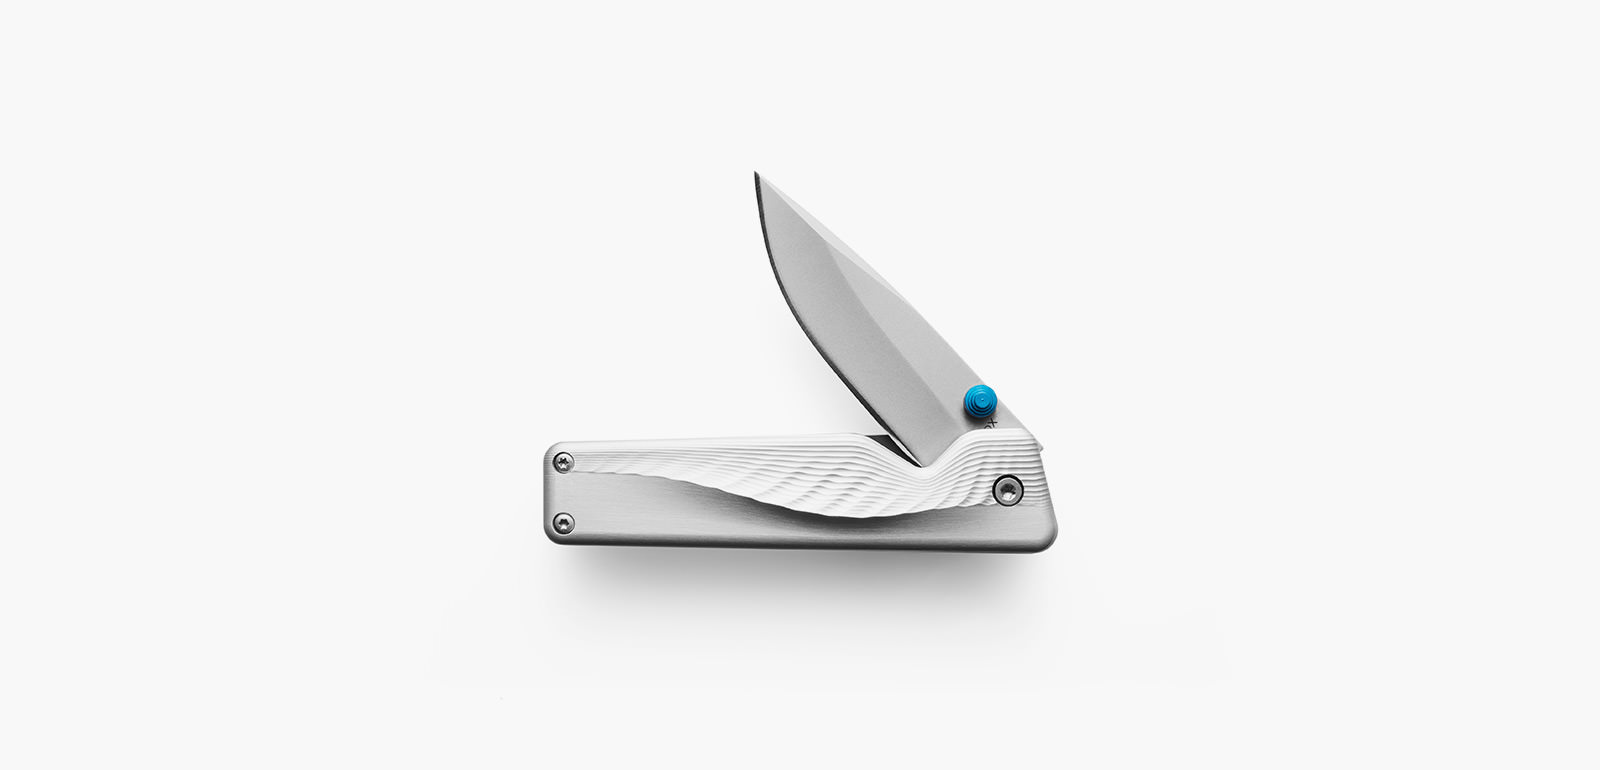 The Swell Knife